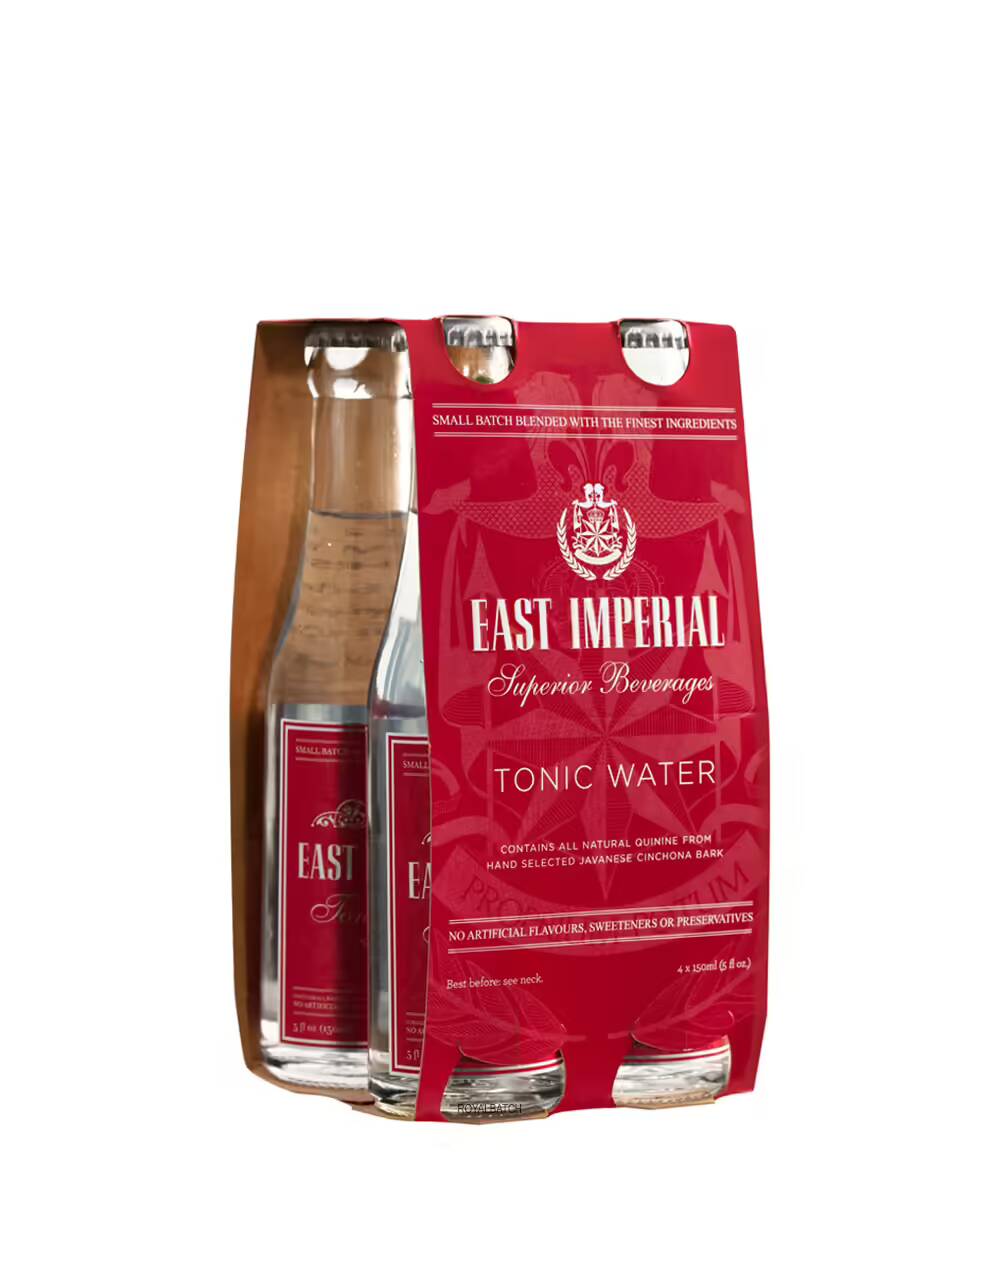 East Imperial Superior Beverages Tonic Water (4 Pack) 150ml